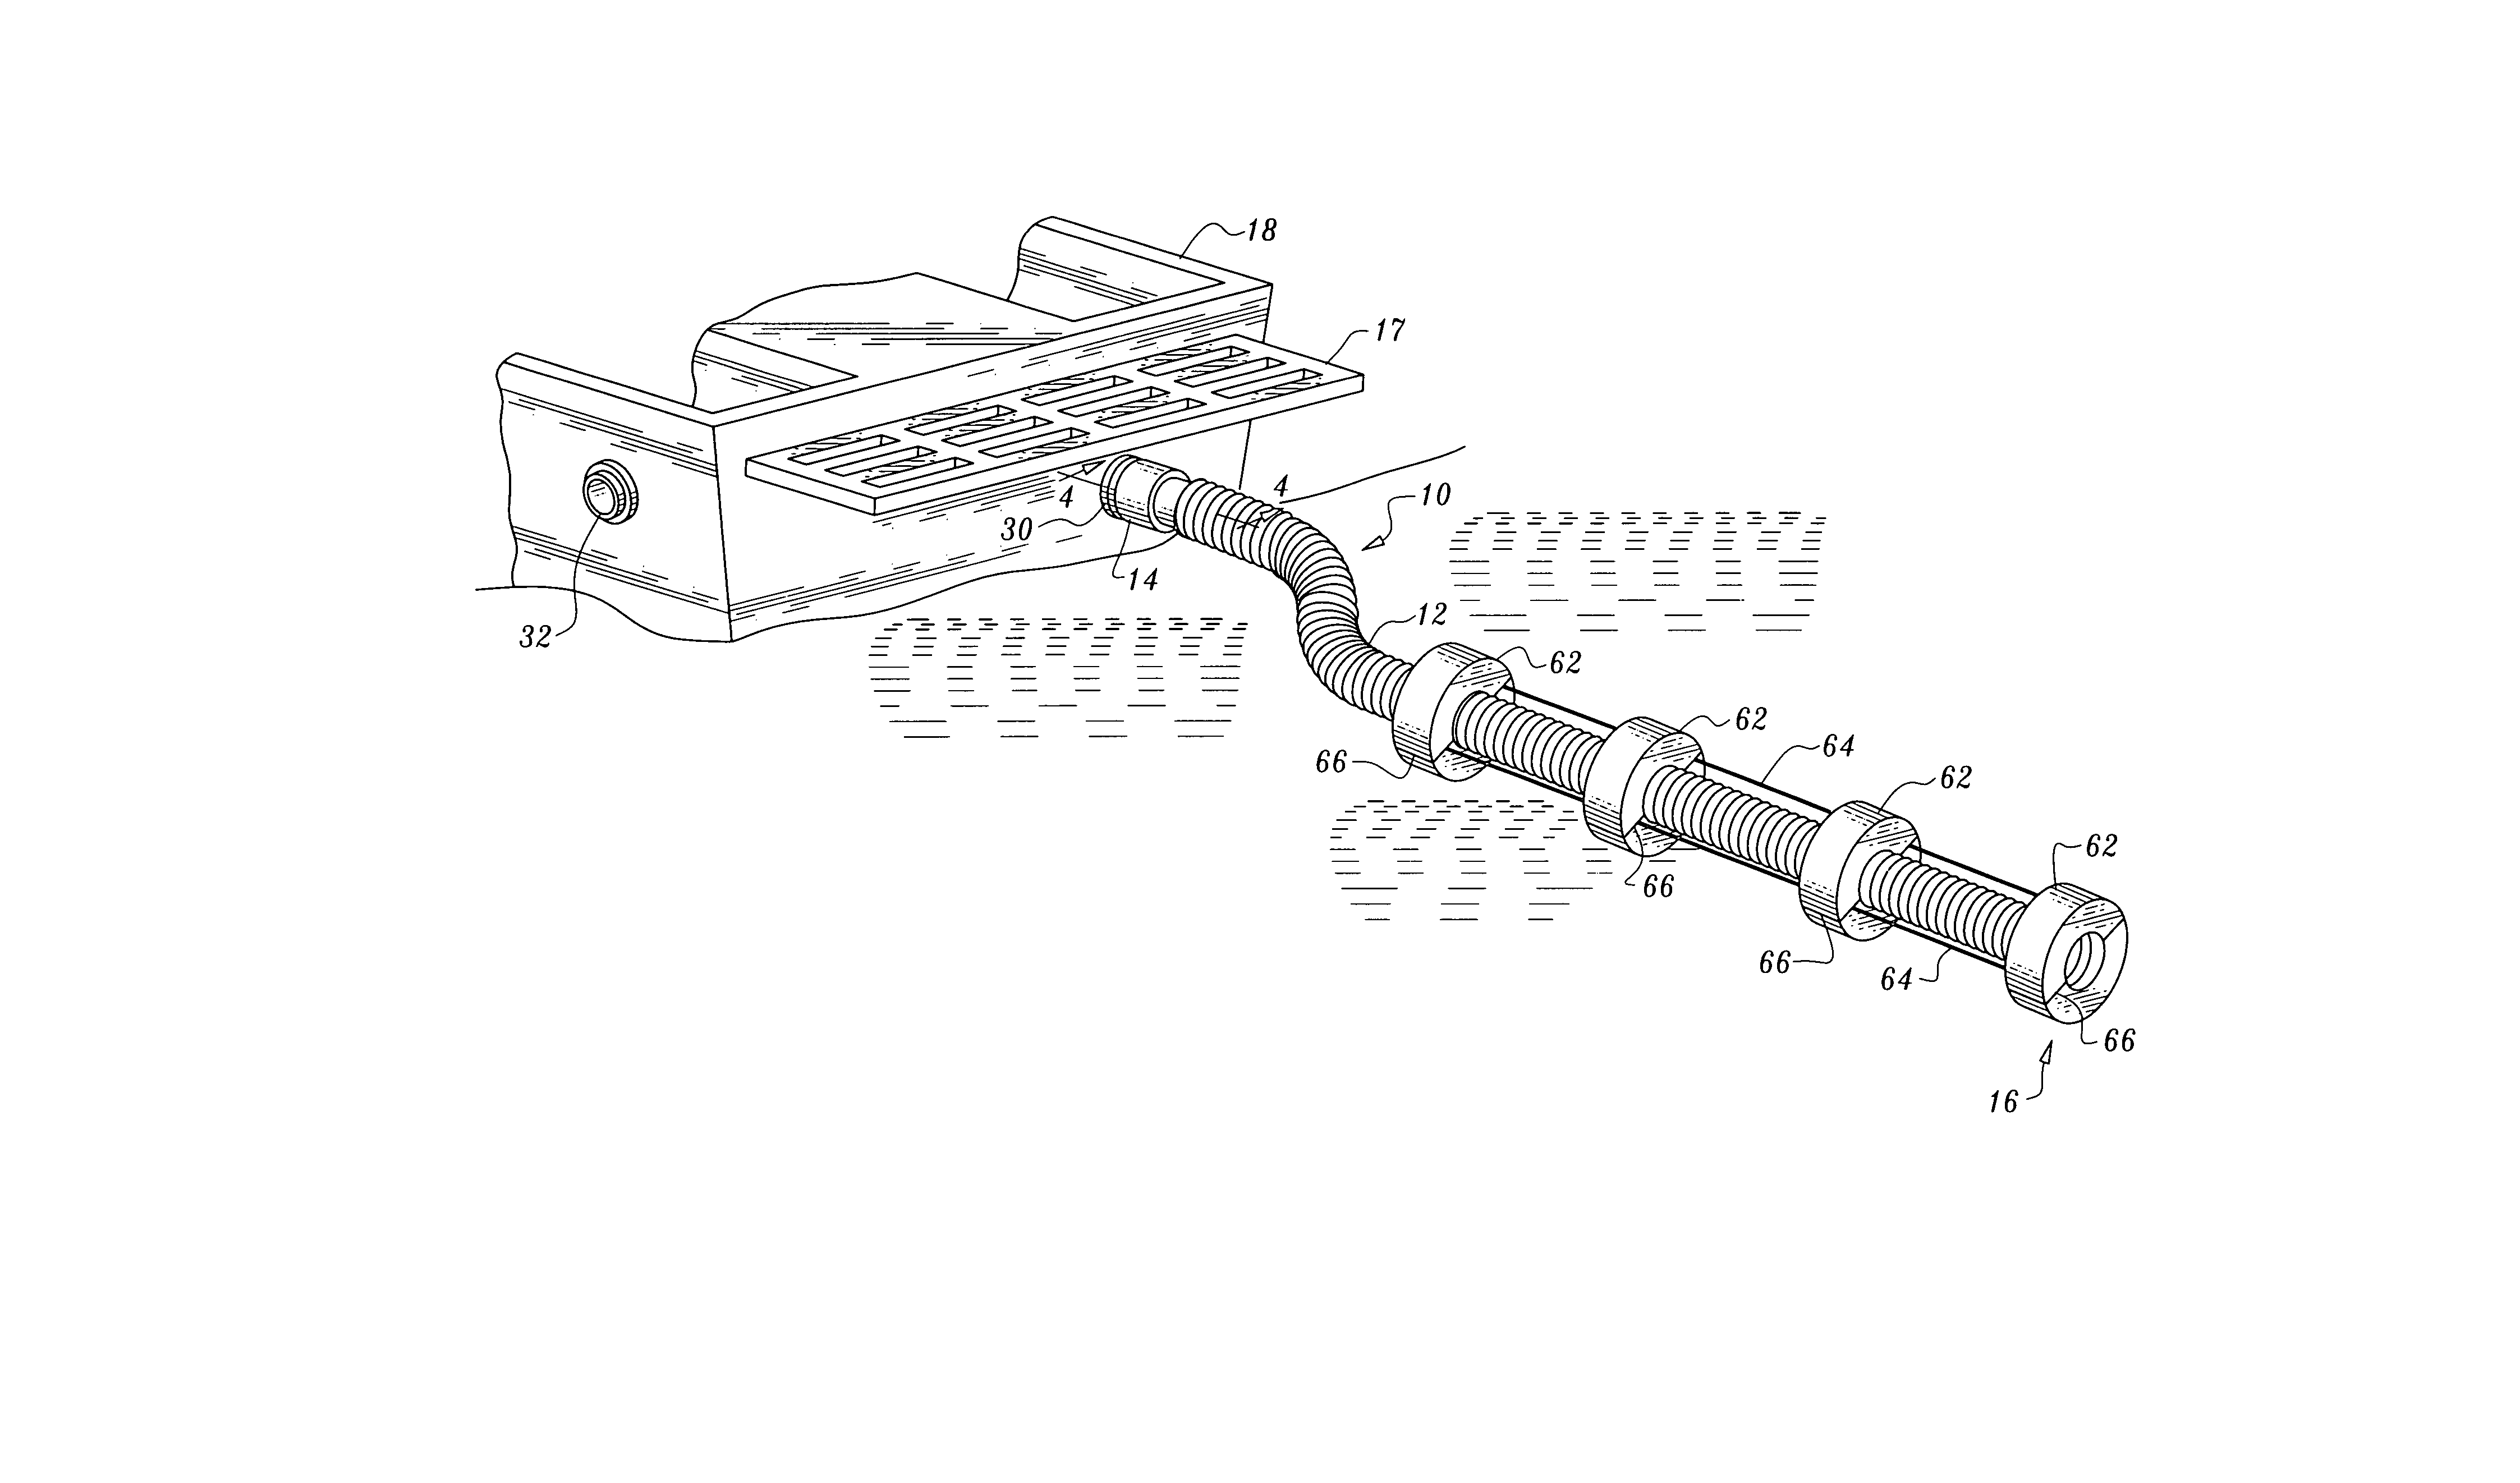 Device for redirecting boat motor exhaust